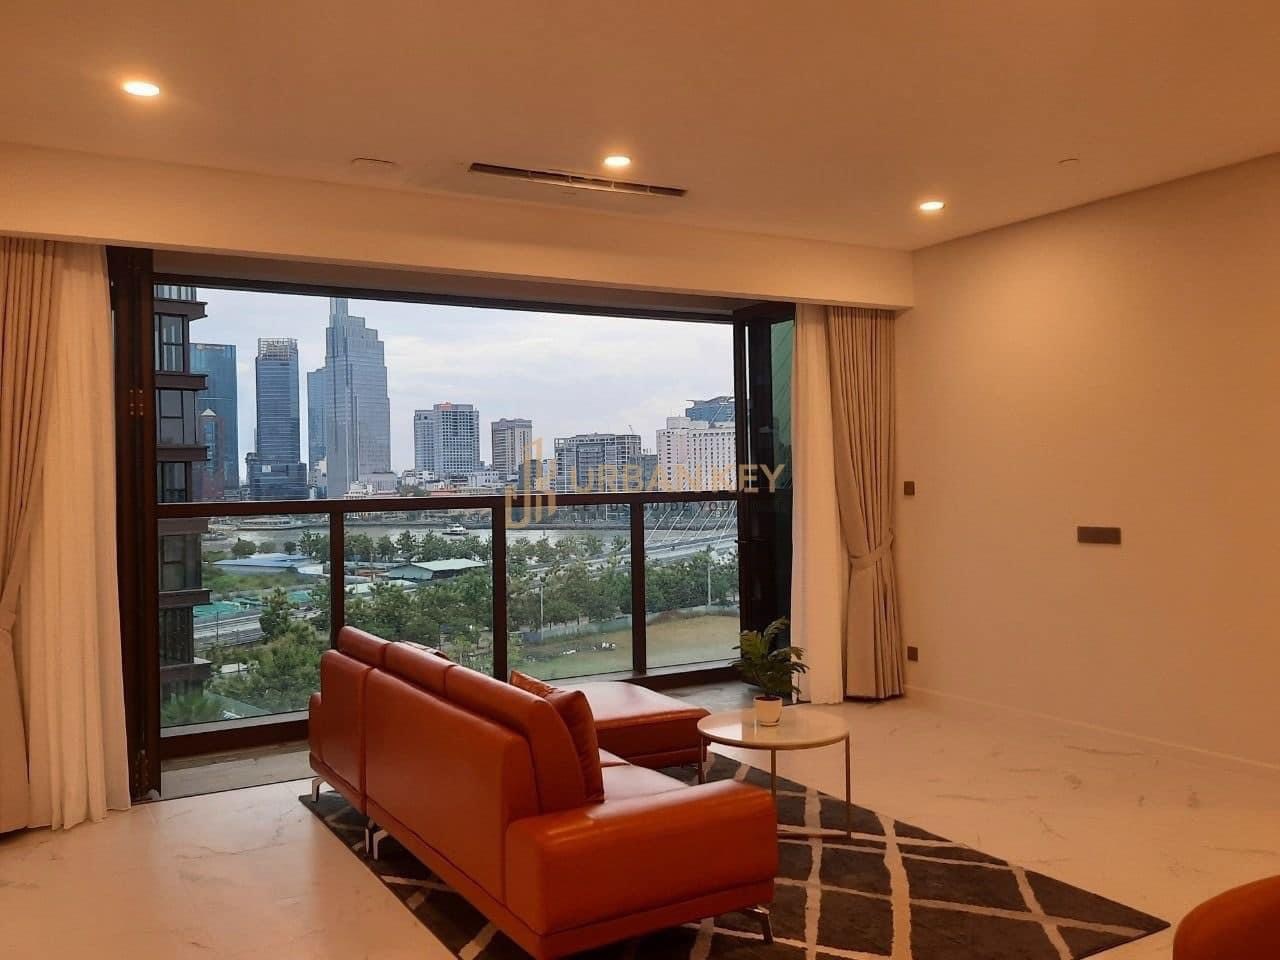 Luxury apartment for rent with beautiful view at The Metropole with 3 bedrooms fully furnished